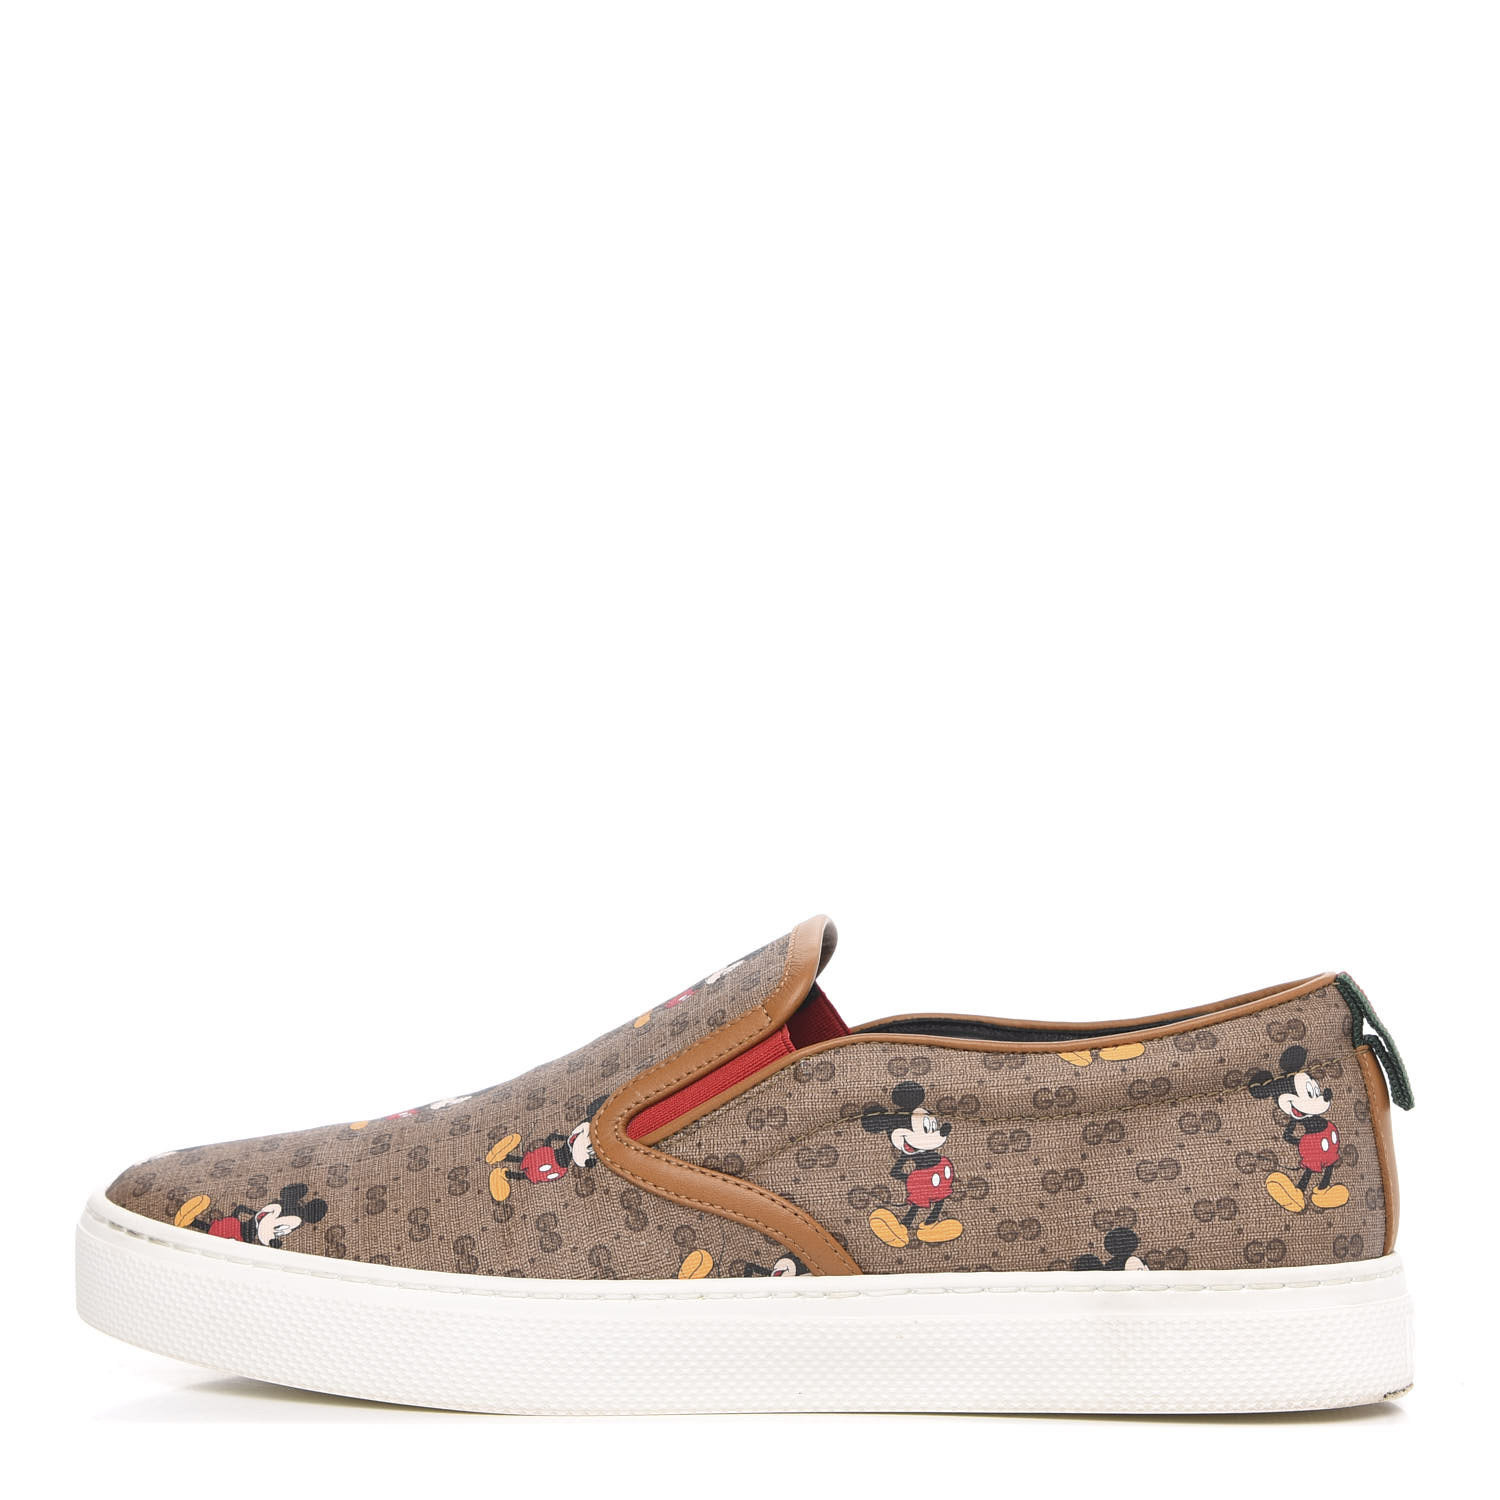 Mickey Monogram Sneakers FREE Shipping!!!